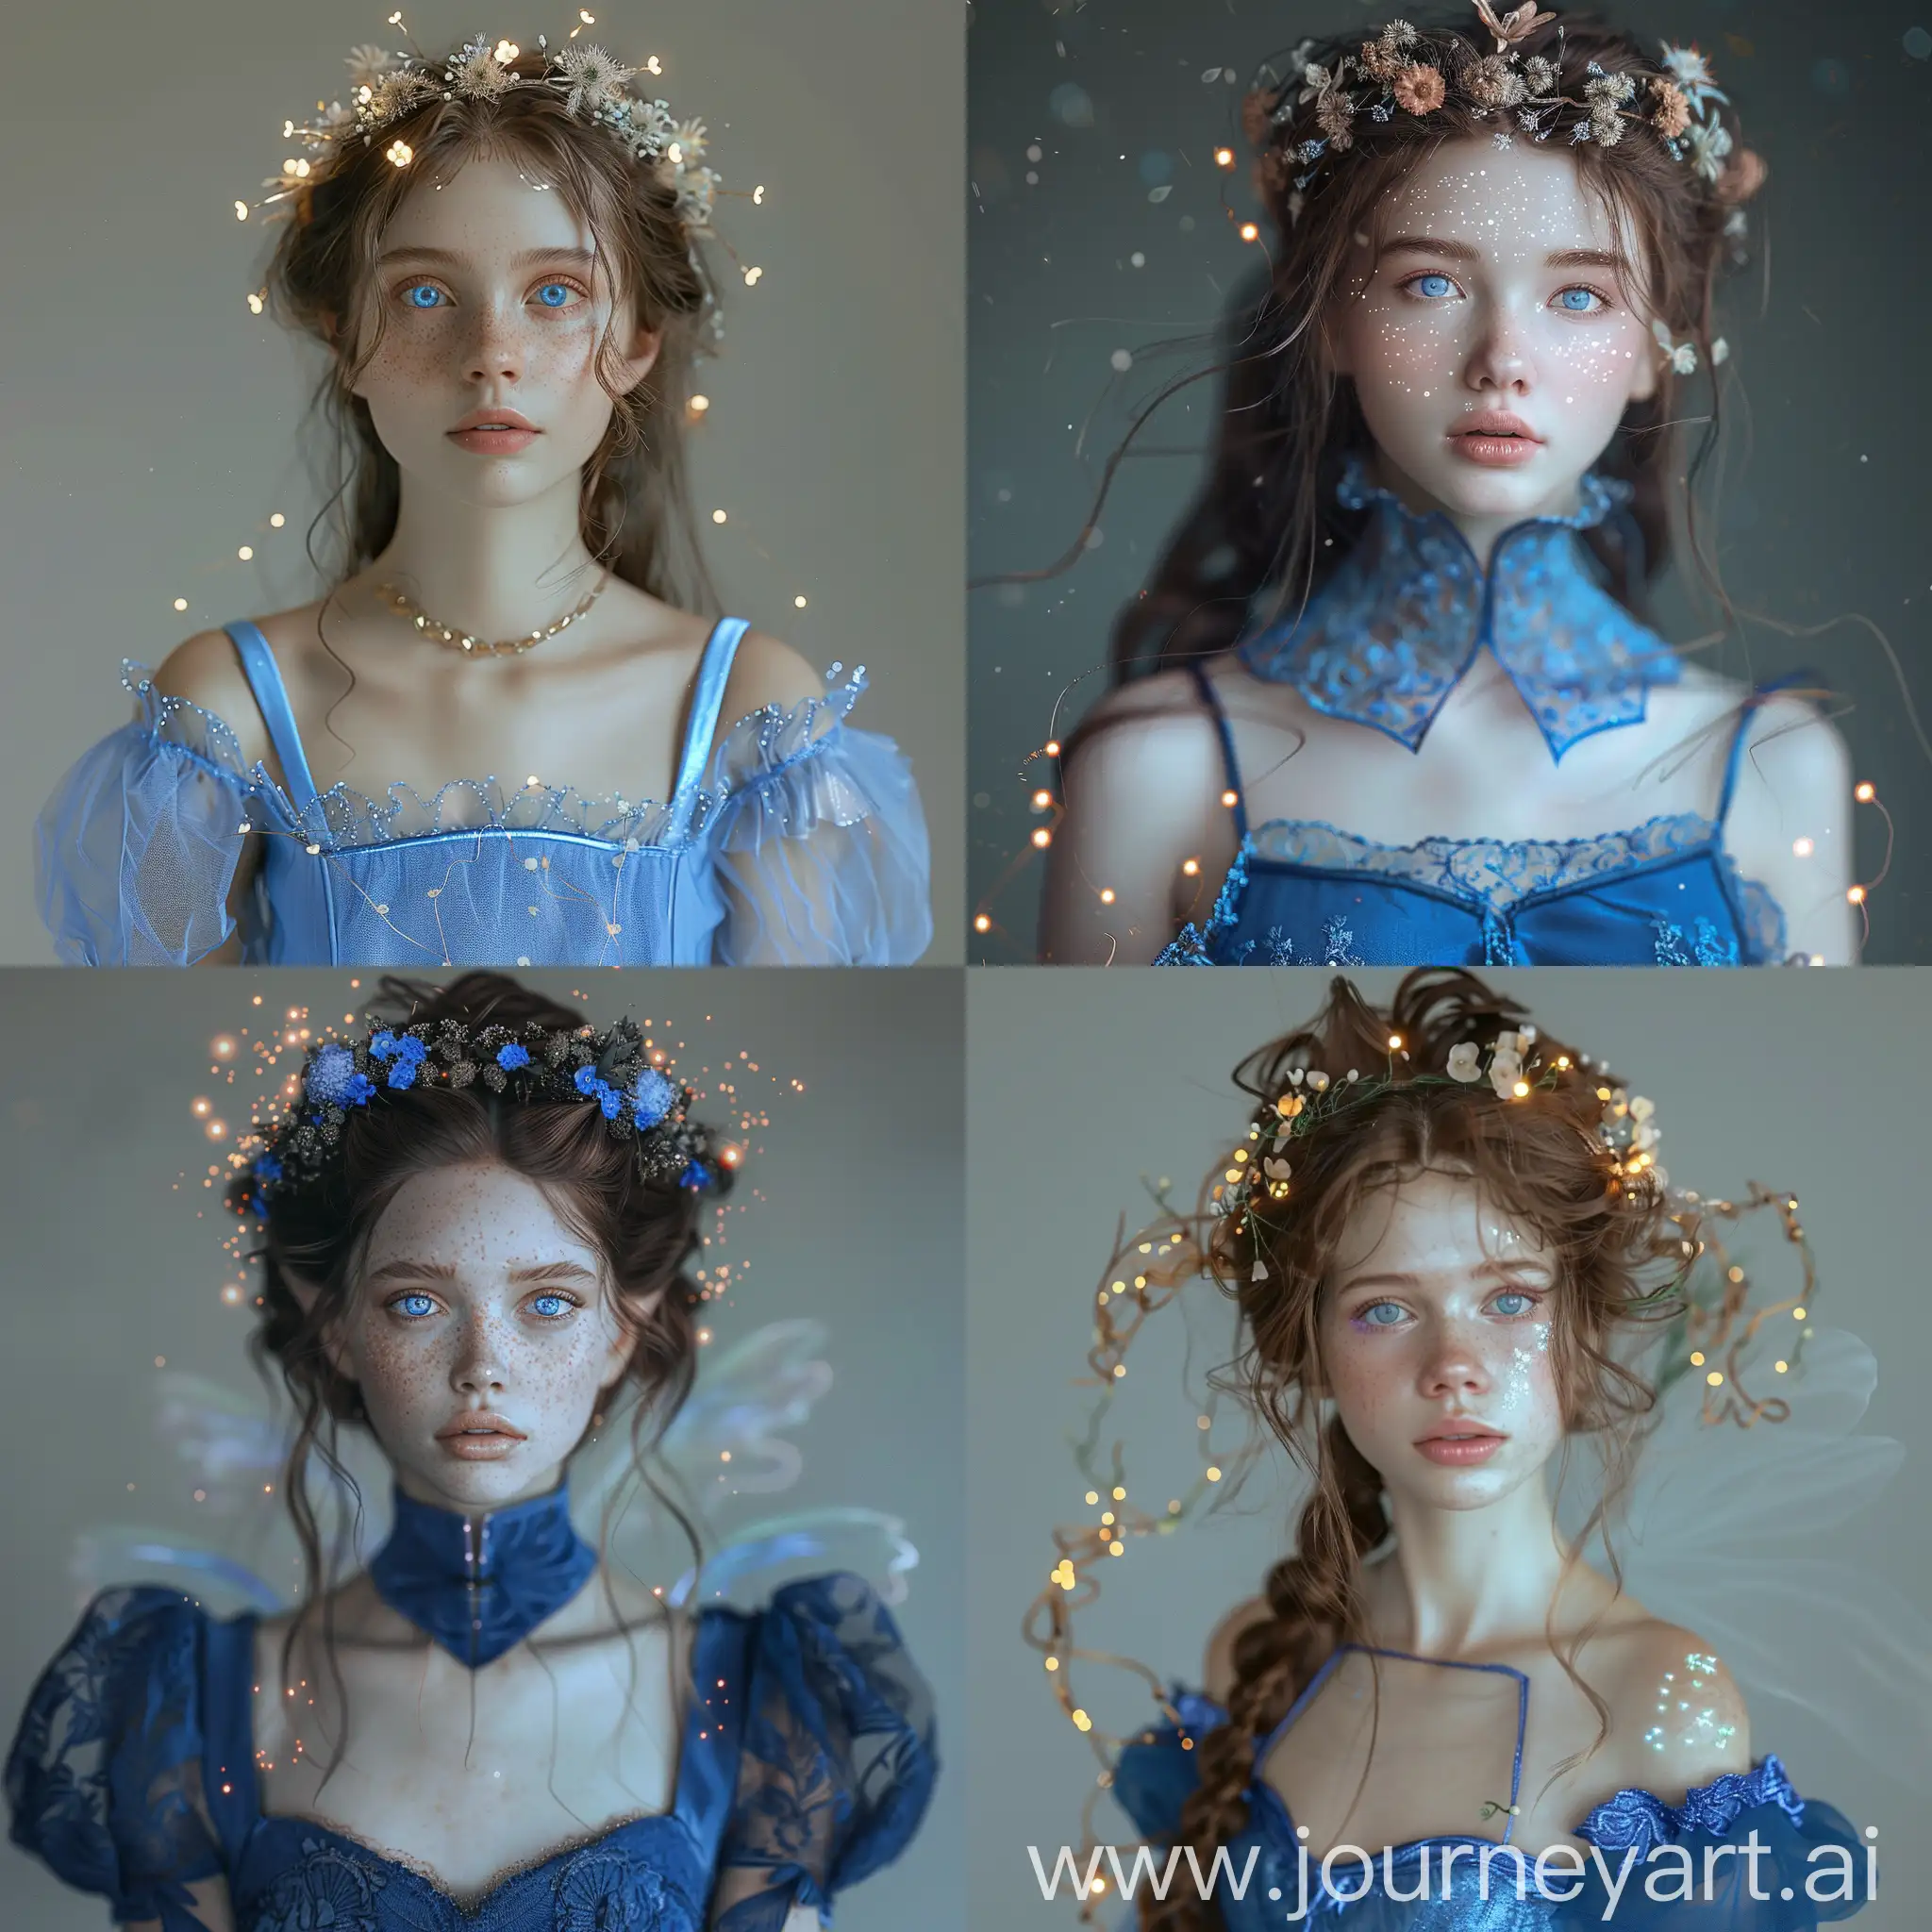 Enchanting-Fairy-Woman-with-Glowing-Flower-Crown-in-Blue-Gown